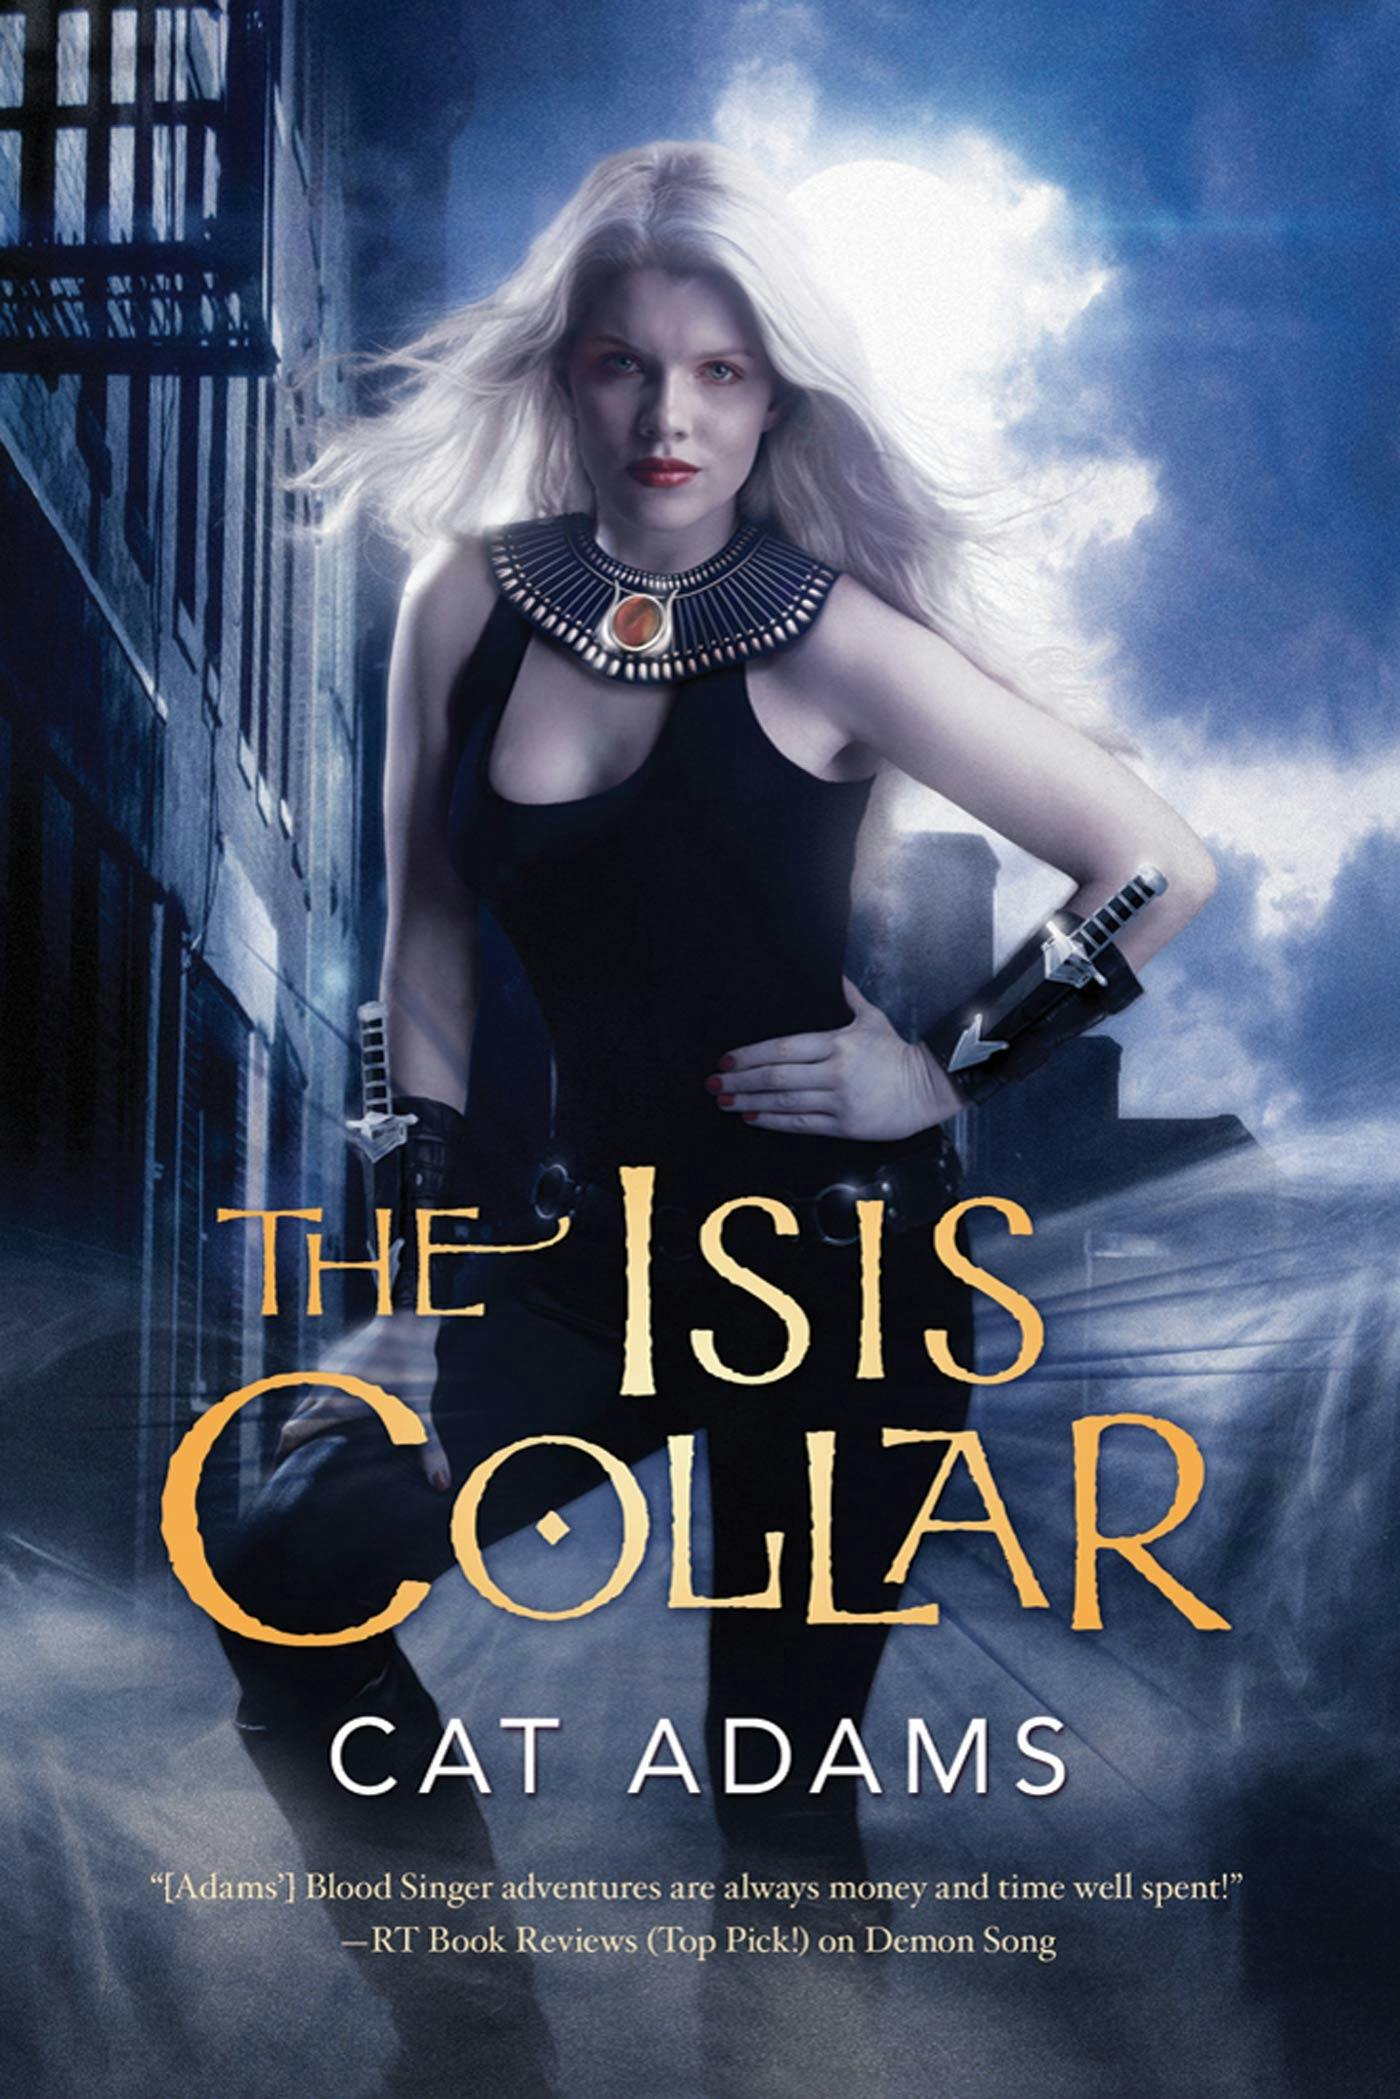 Cover for the book titled as: The Isis Collar